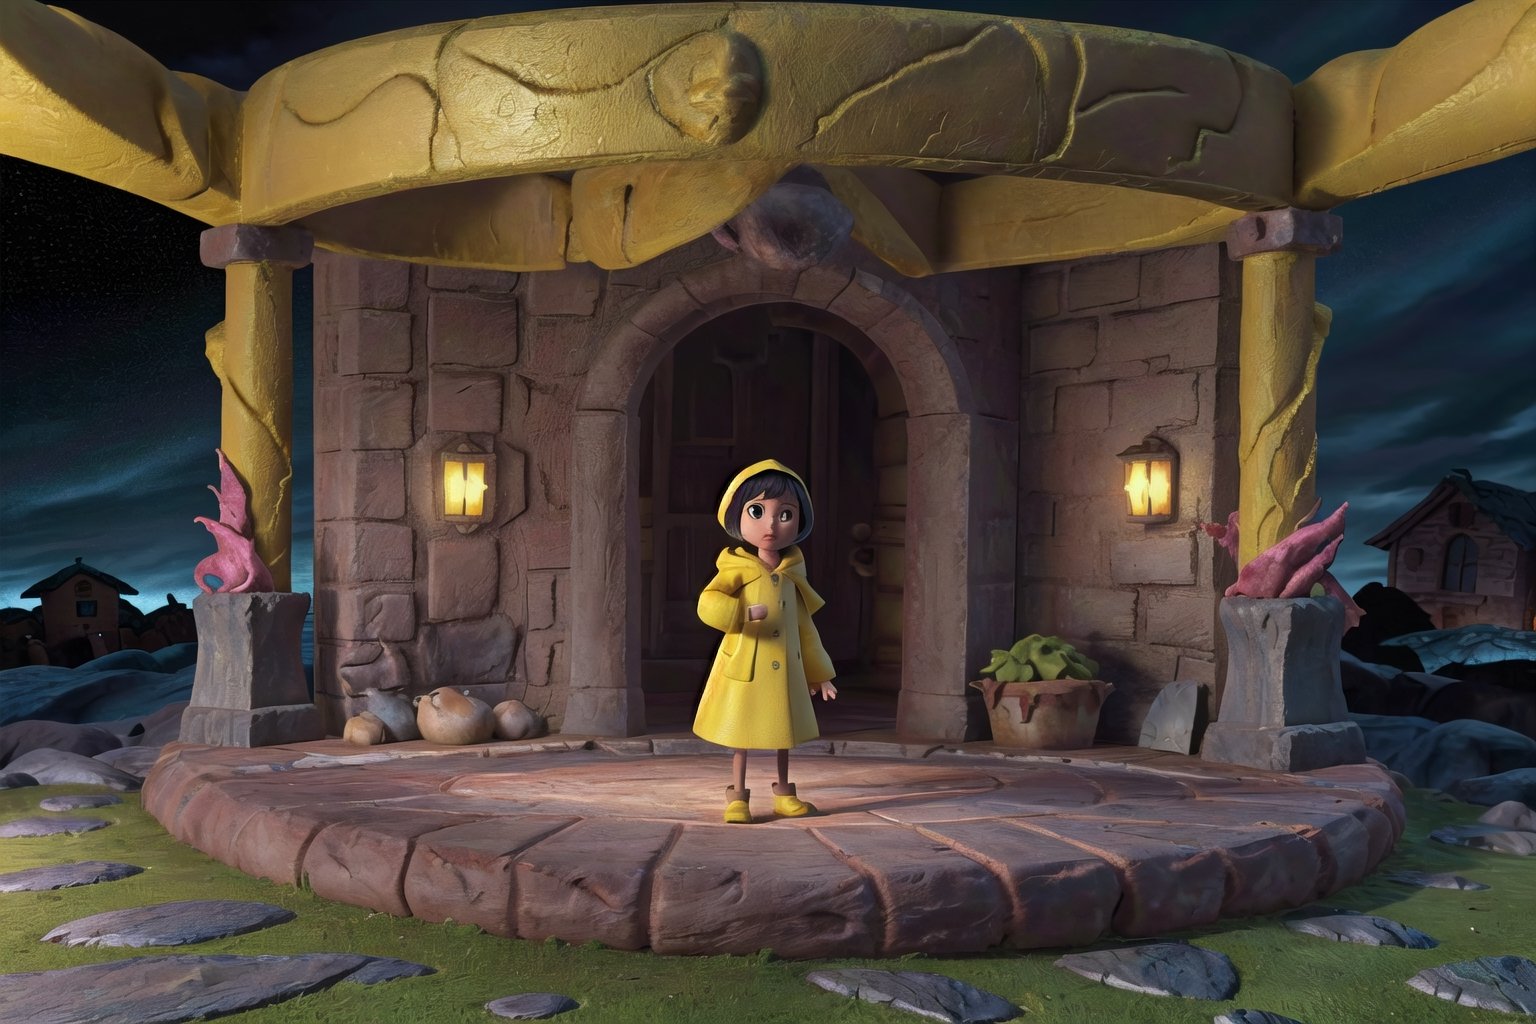 (masterpiece, high resolution, claymation:1.2), (little nightmares:1.2), (fantasy:1.1), beautiful, (1girl, yellow raincoat, yellow hooded cloak:1.4), fairytale, (stop motion:1.1), (dark and creepy atmosphere:1.2), (hyperrealistic), (Coraline-inspired:1.1), (horror theme:1.2), (fantastic lighting:1.2), (detailed set design:1.1), (spooky characters:1.2), (haunting shadows:1.1), (sinister dolls:1.2), (twisted narrative:1.1), sharp focus, (deep depth of field:1.4), (tilt shift:1.1), dramatic, (cinematic:1.2),RING, bloom, soft lighting, dramatic lighting, spotlight, (dark theme, in darkness:1.2)